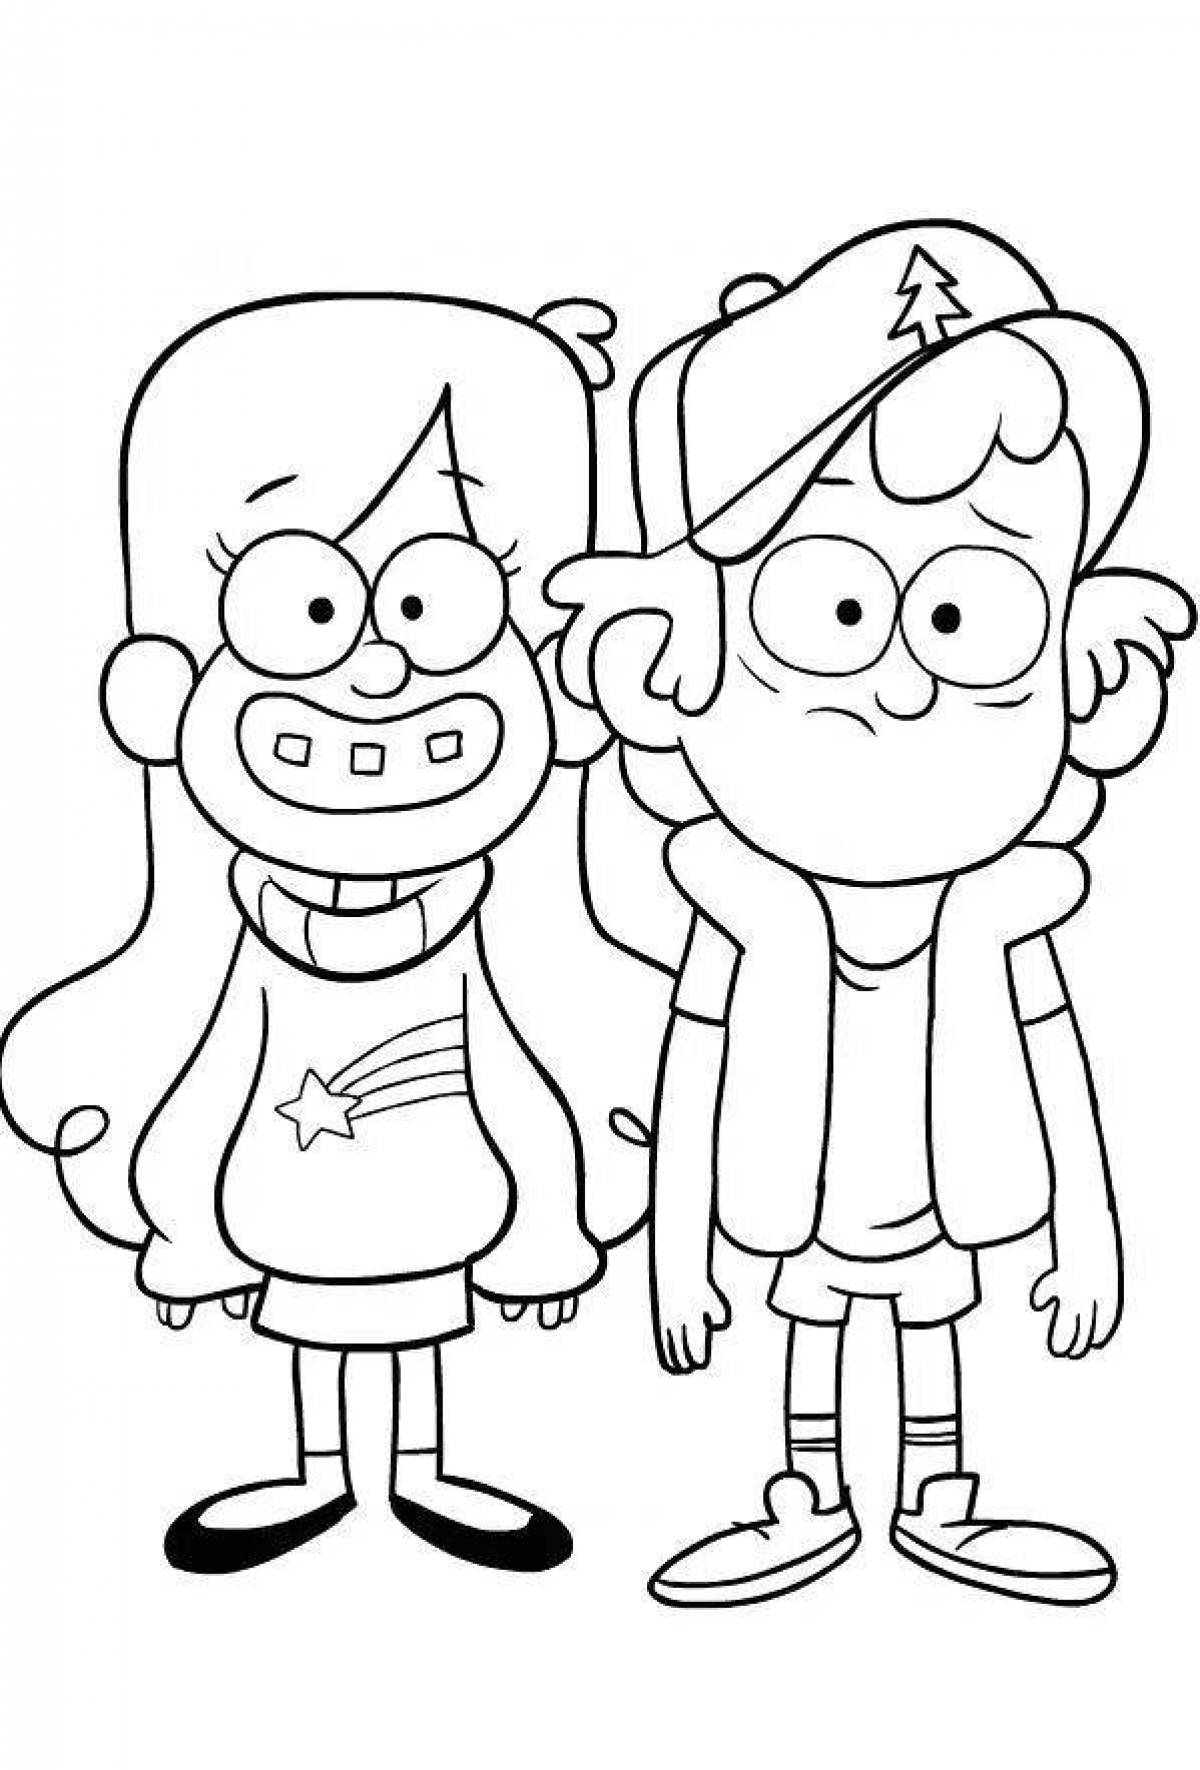 Gravity Falls Dipper's Fascinating Coloring Page